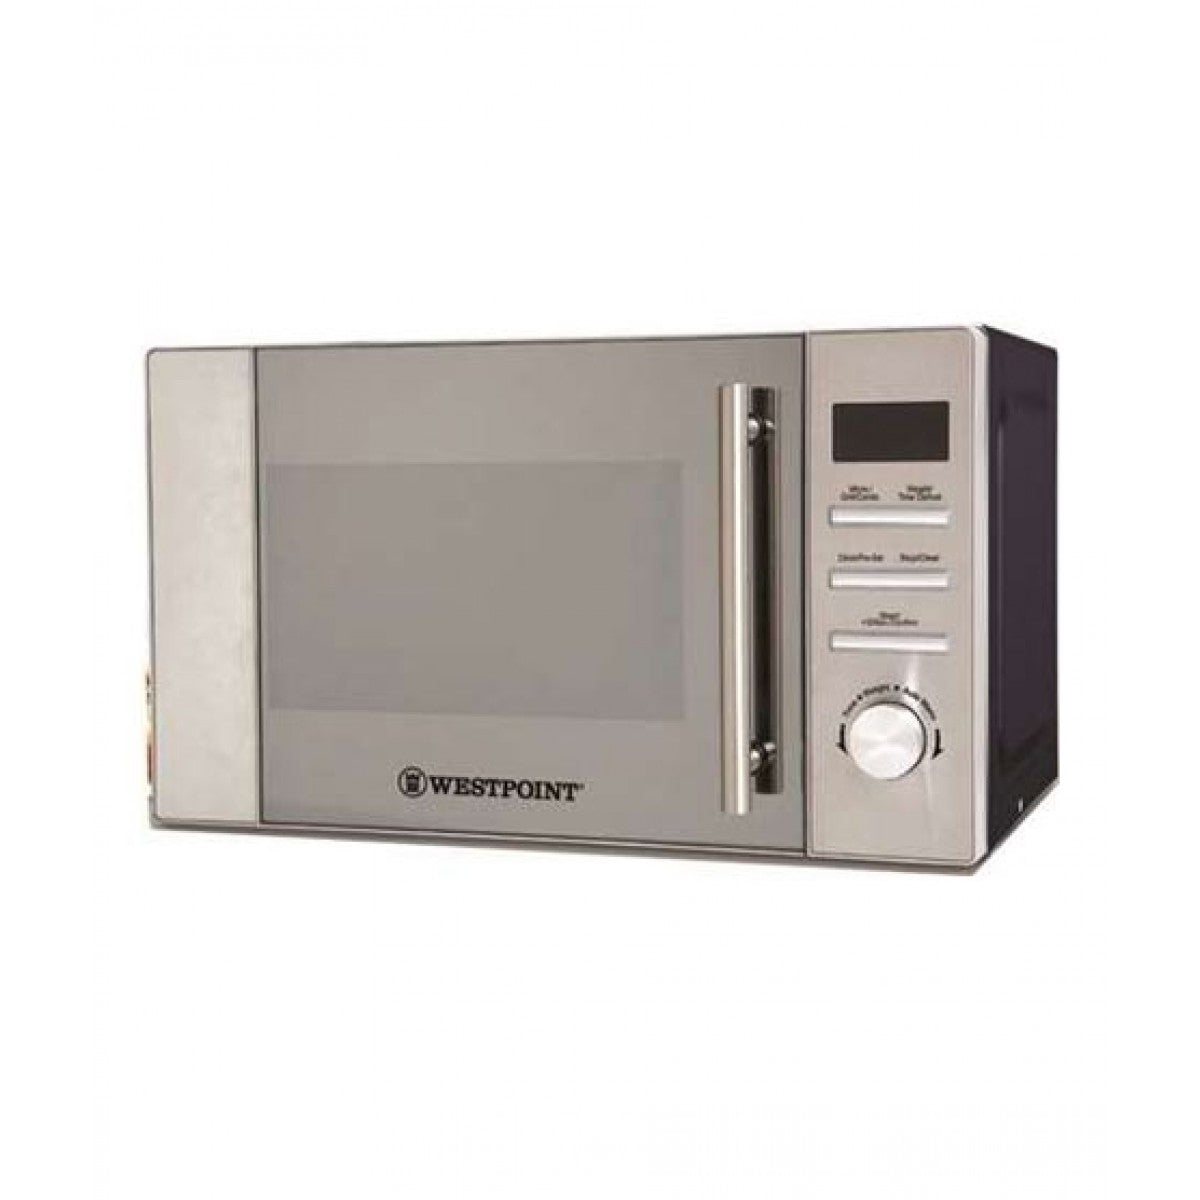 Westpoint Microwave Oven with Grill WF-830DG Price in Pakistan 